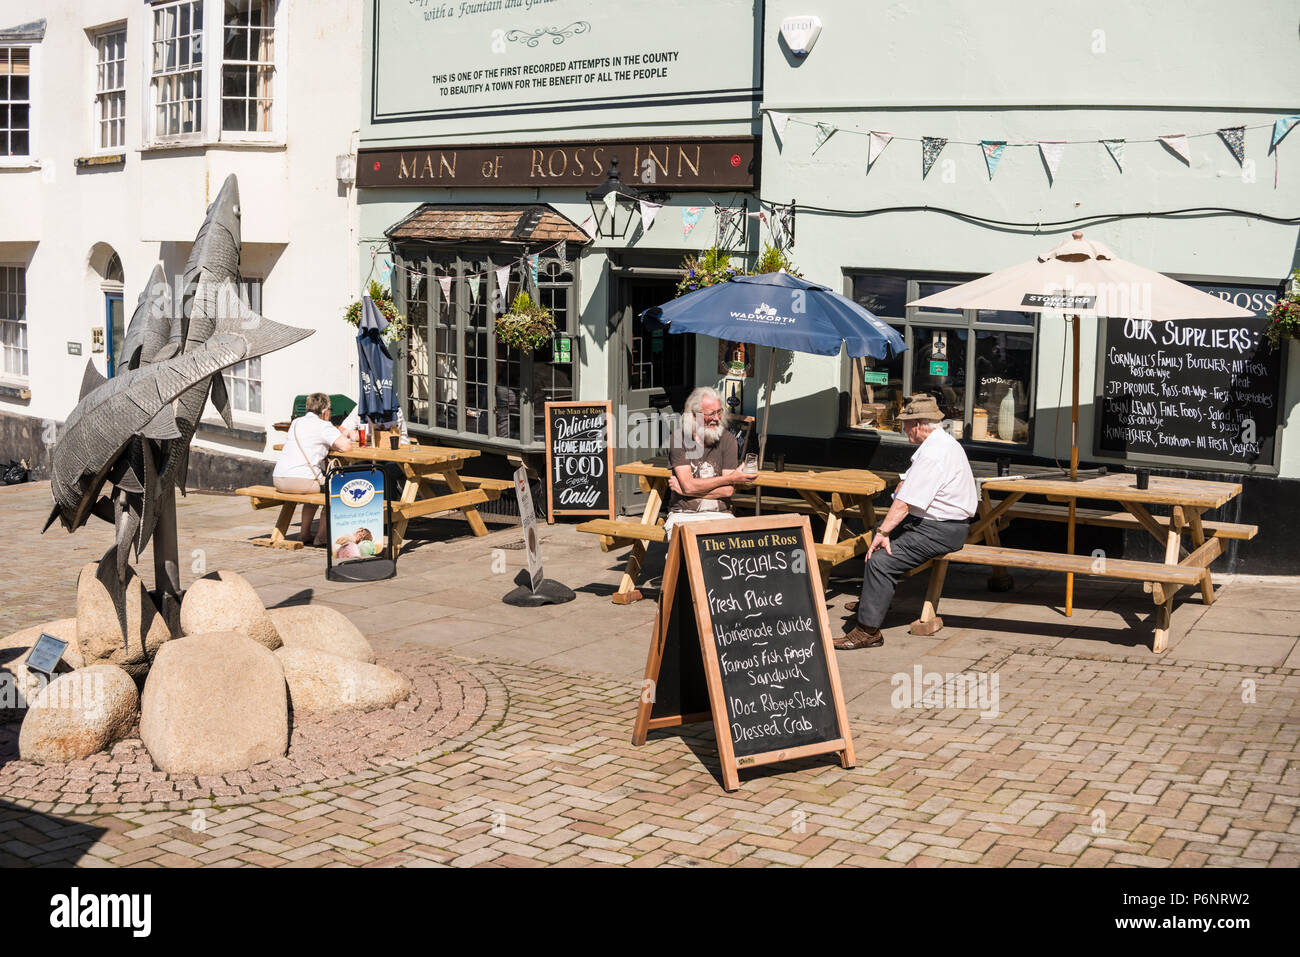 People sitting outside of Man of Ross Inn pub and enjoying drinks and sunny weather, Wye Street, The Man of Ross Inn, Ross on Wye, Herefordshire, UK Stock Photo